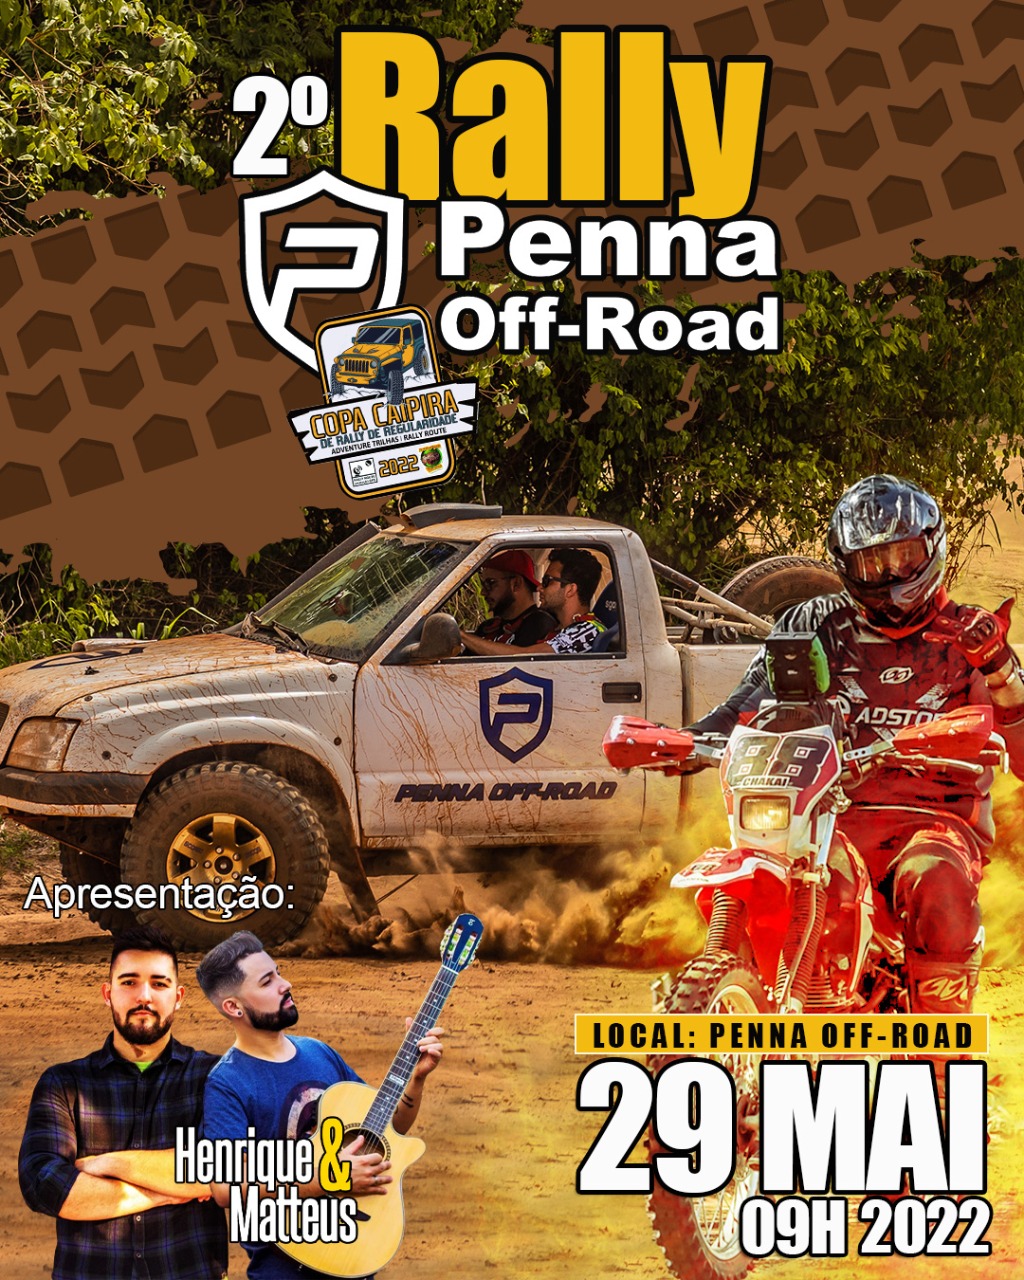 2° RALLY DO PENNA OFFROAD 2022